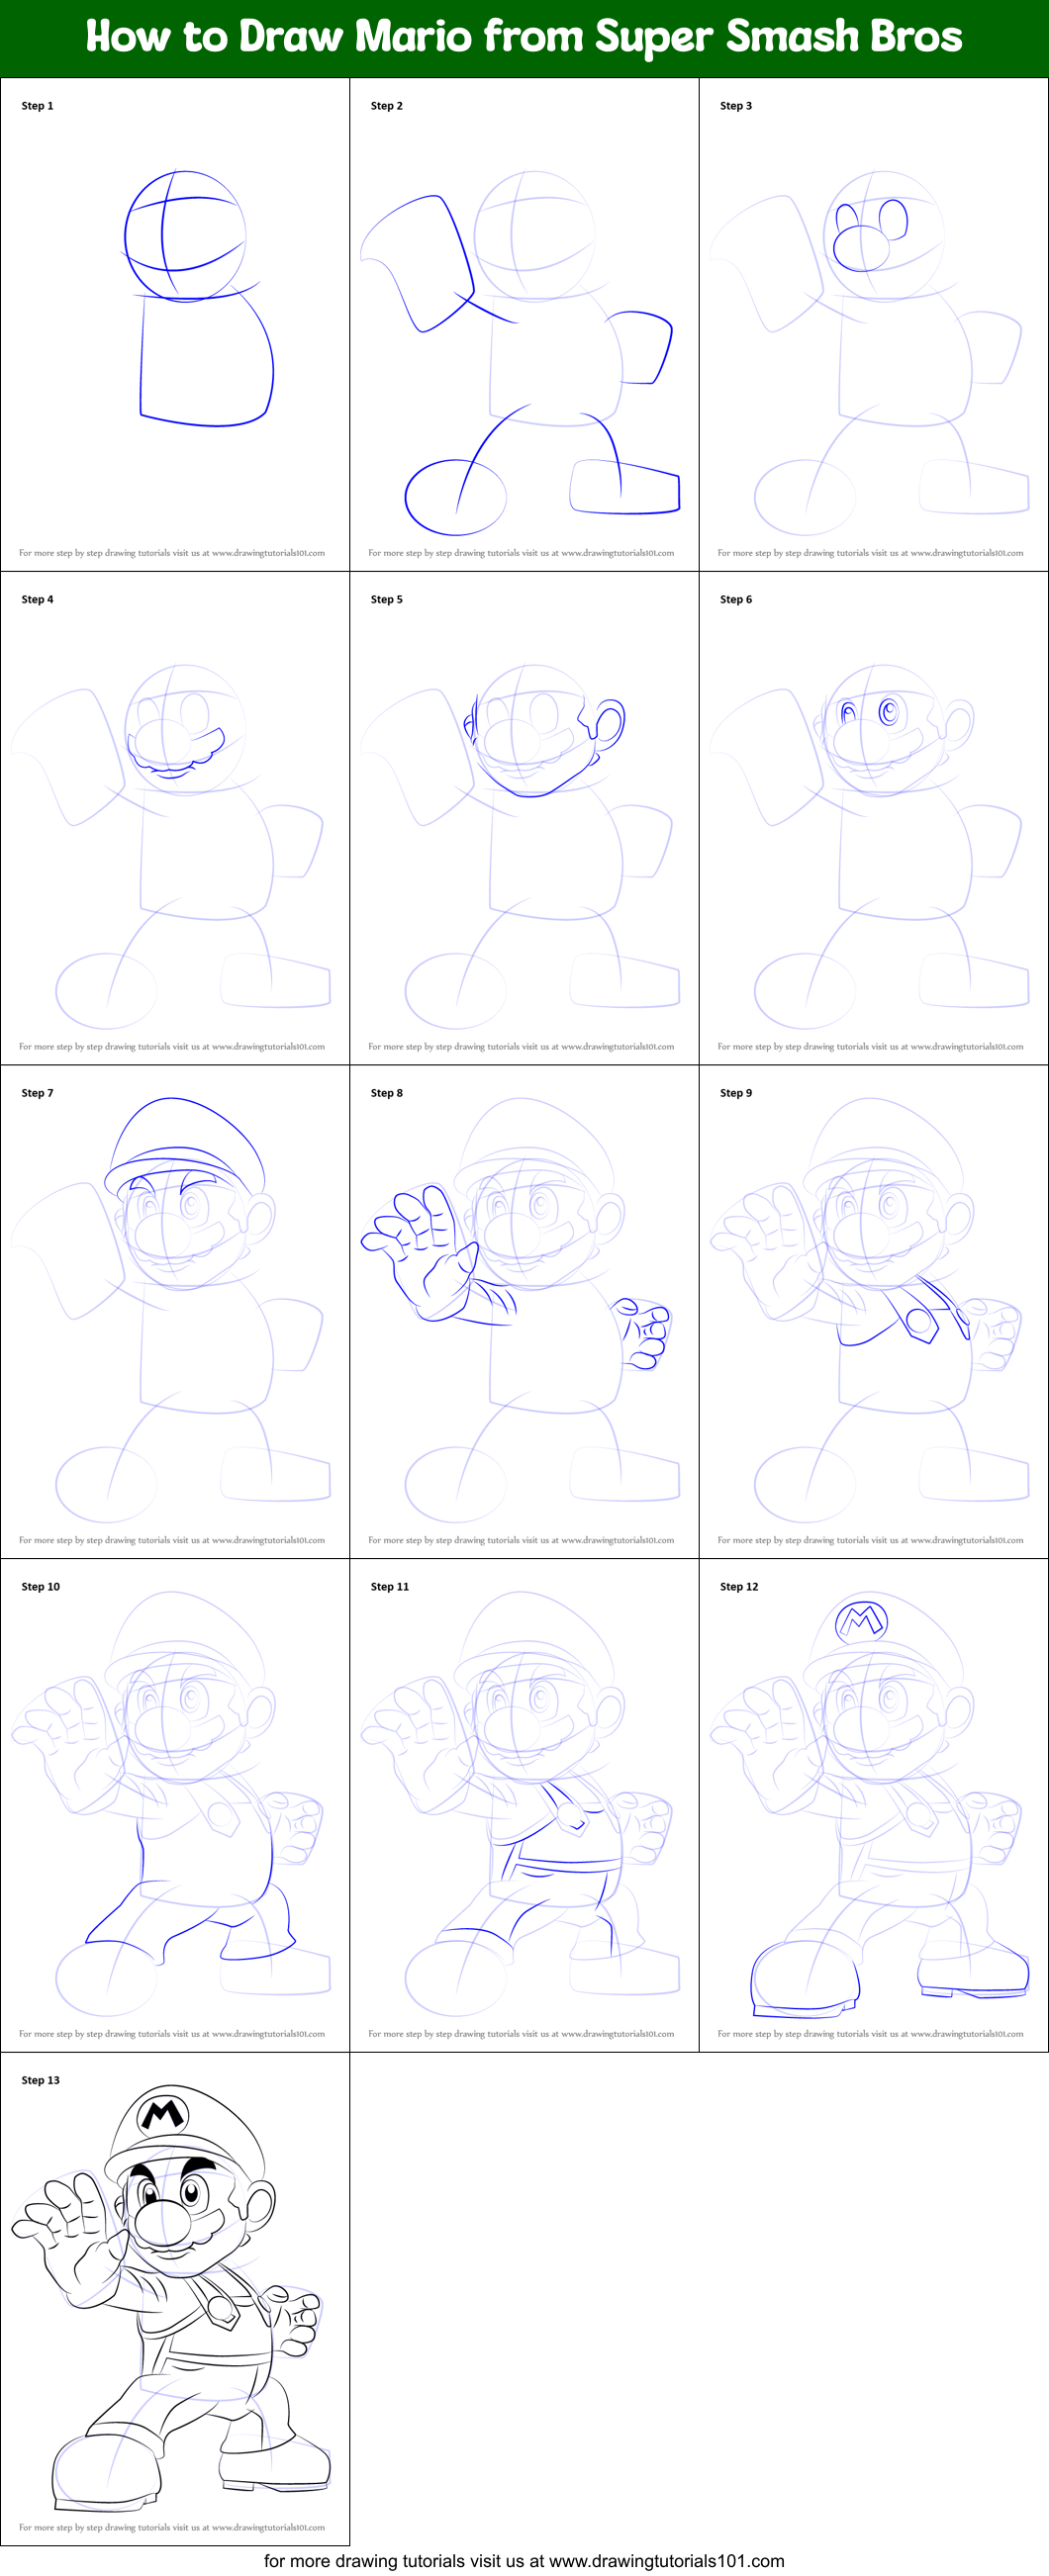 How to Draw Mario from Super Smash Bros (Super Smash Bros.) Step by ...